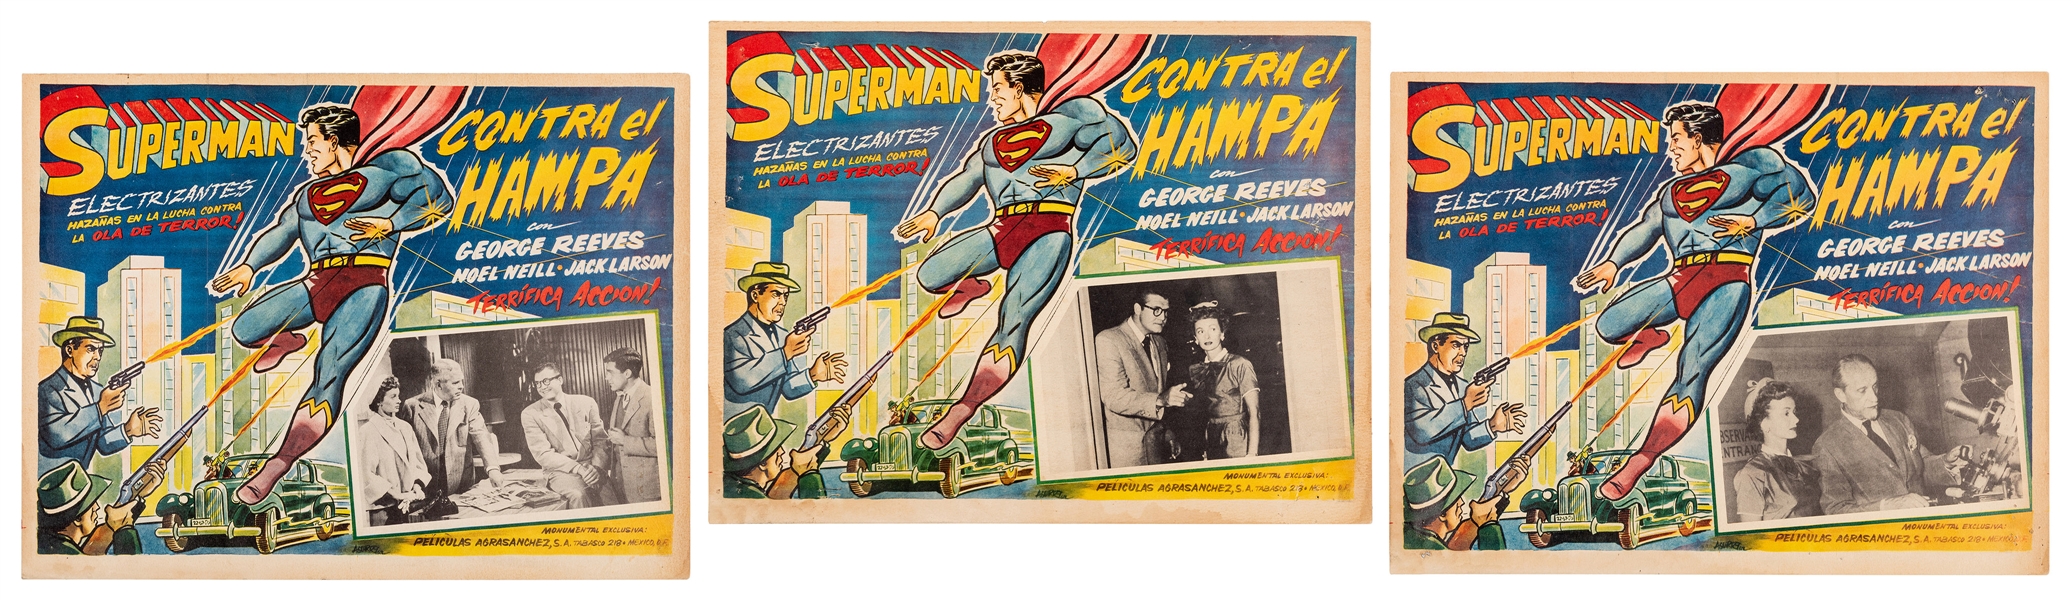  Superman Against the World Mexican Lobby Cards. 3 total. Co...